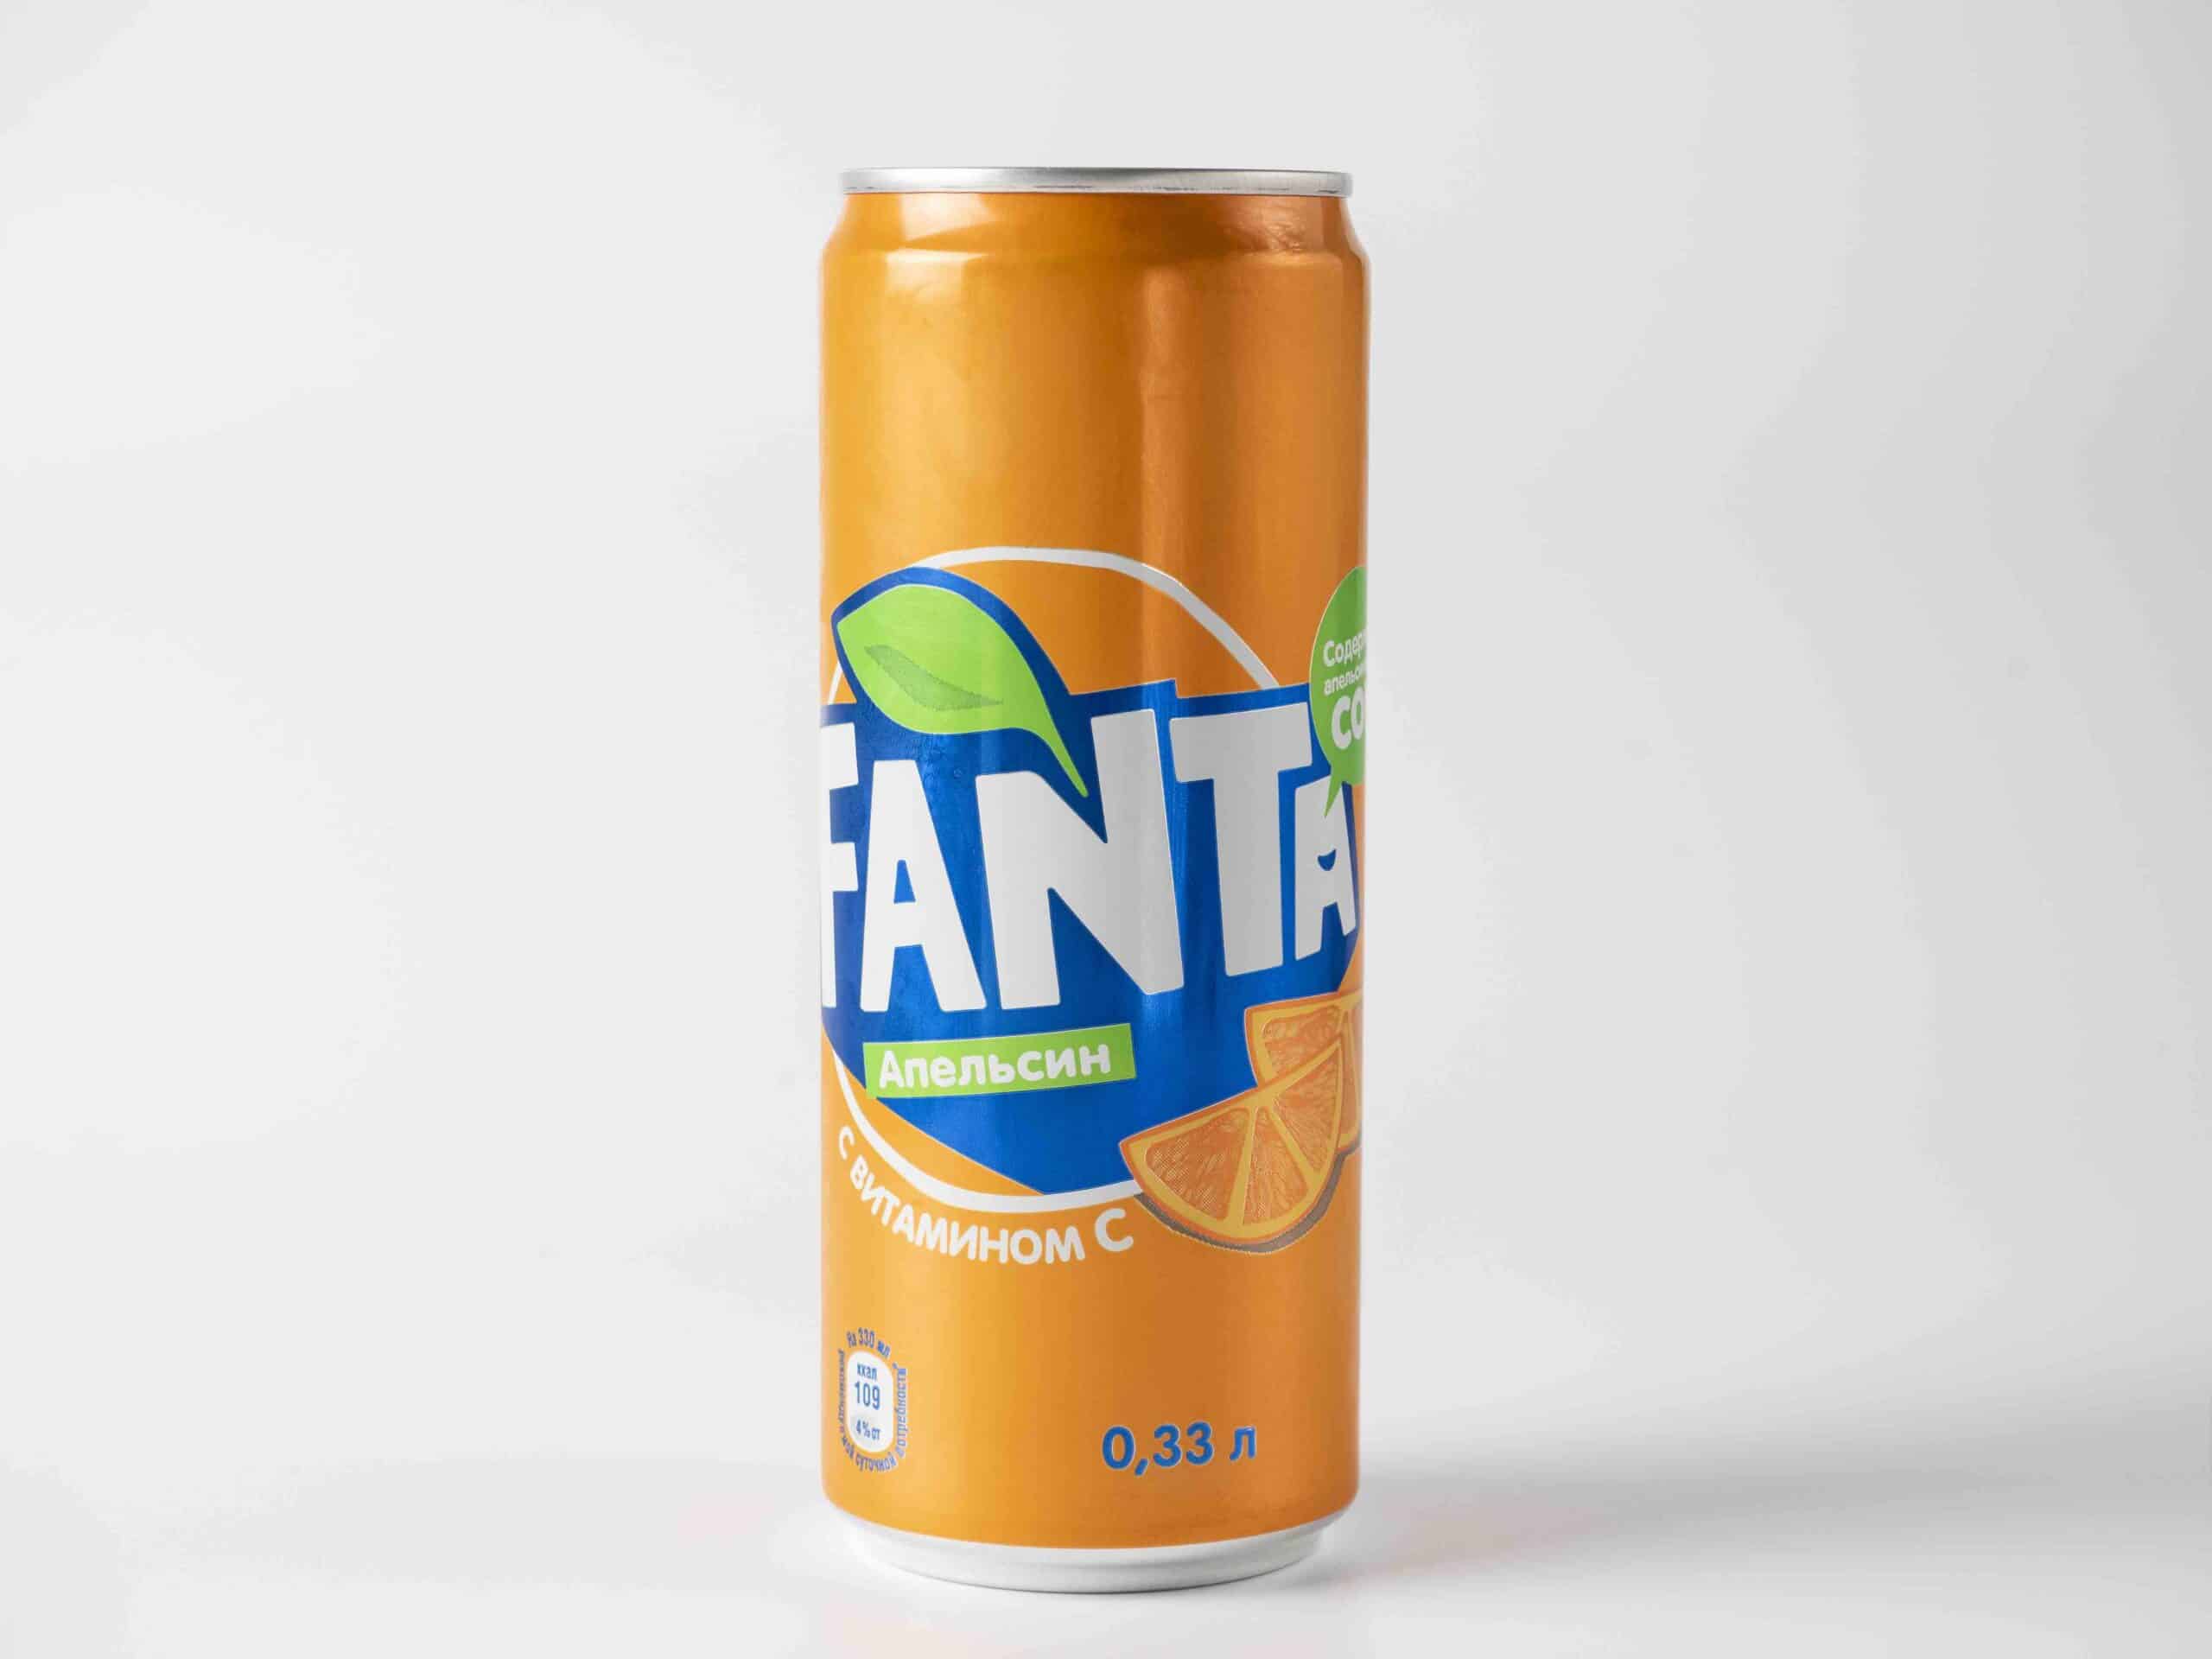 Aluminum can with sweet carbonated drink Fanta isolated on a white background, made for Russia. Popular beverage brand